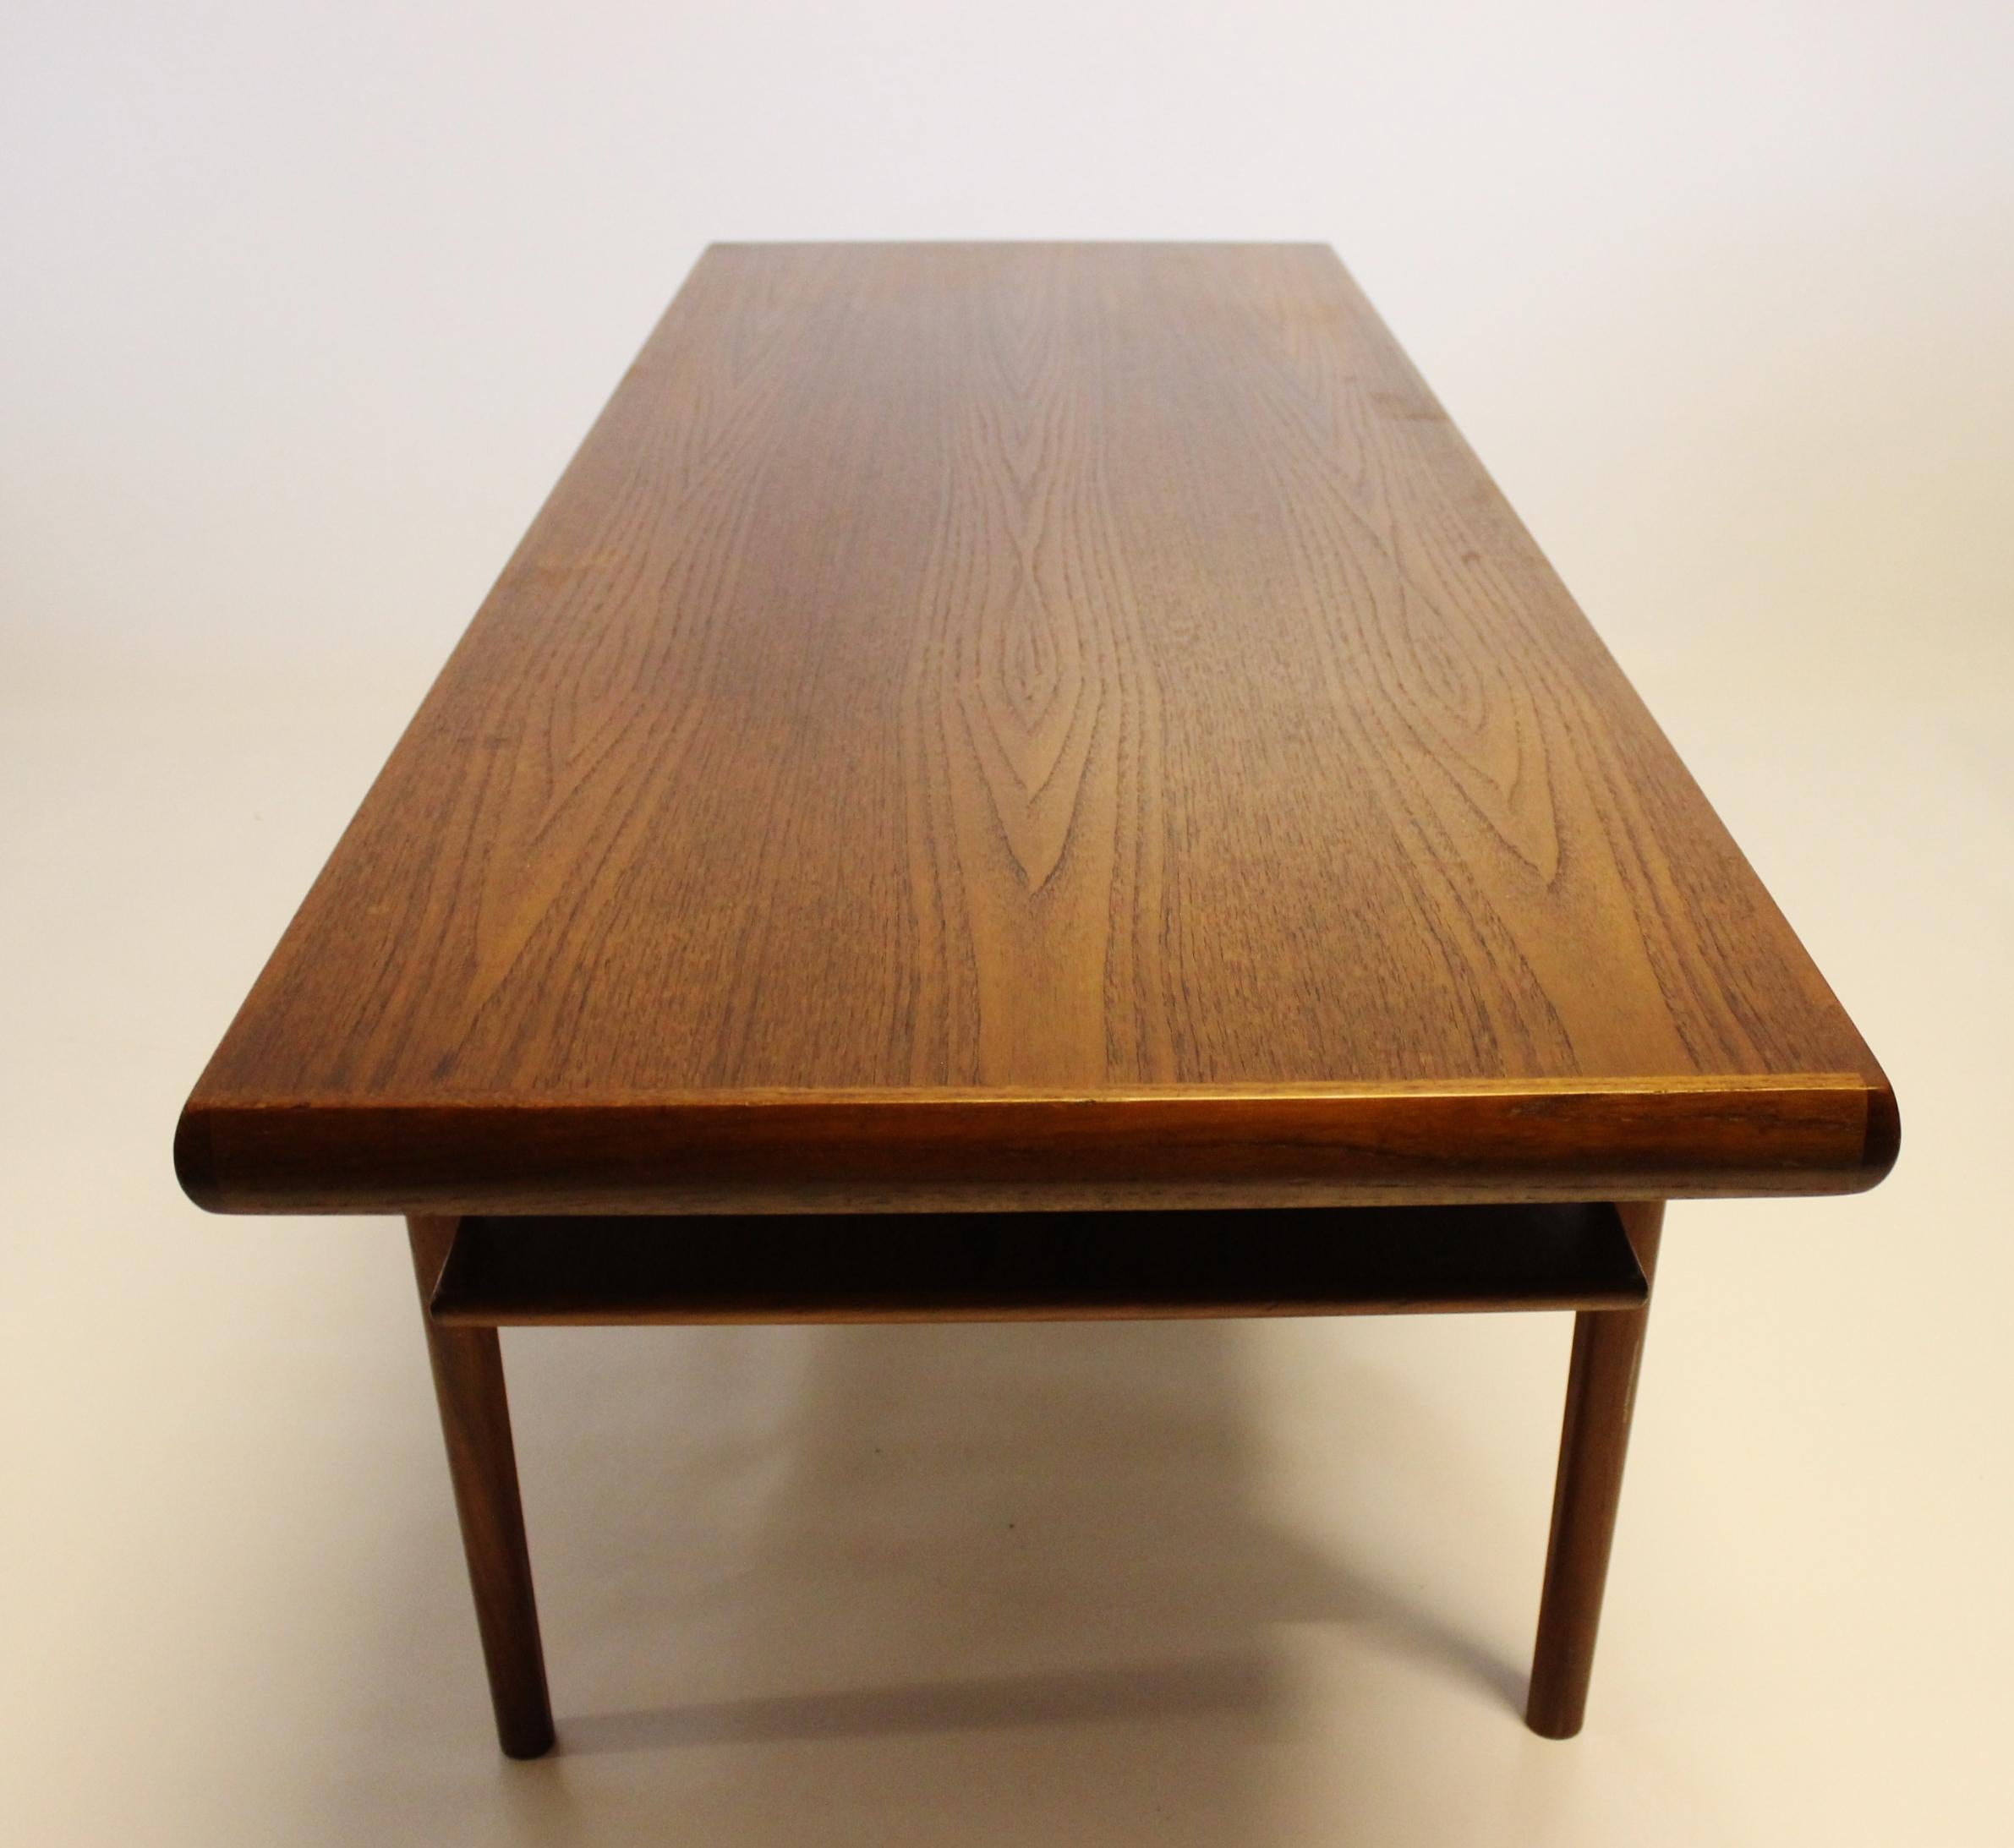 Mid-Century Modern Coffee Table with Shelf in Teak of Danish Design from the 1960s For Sale